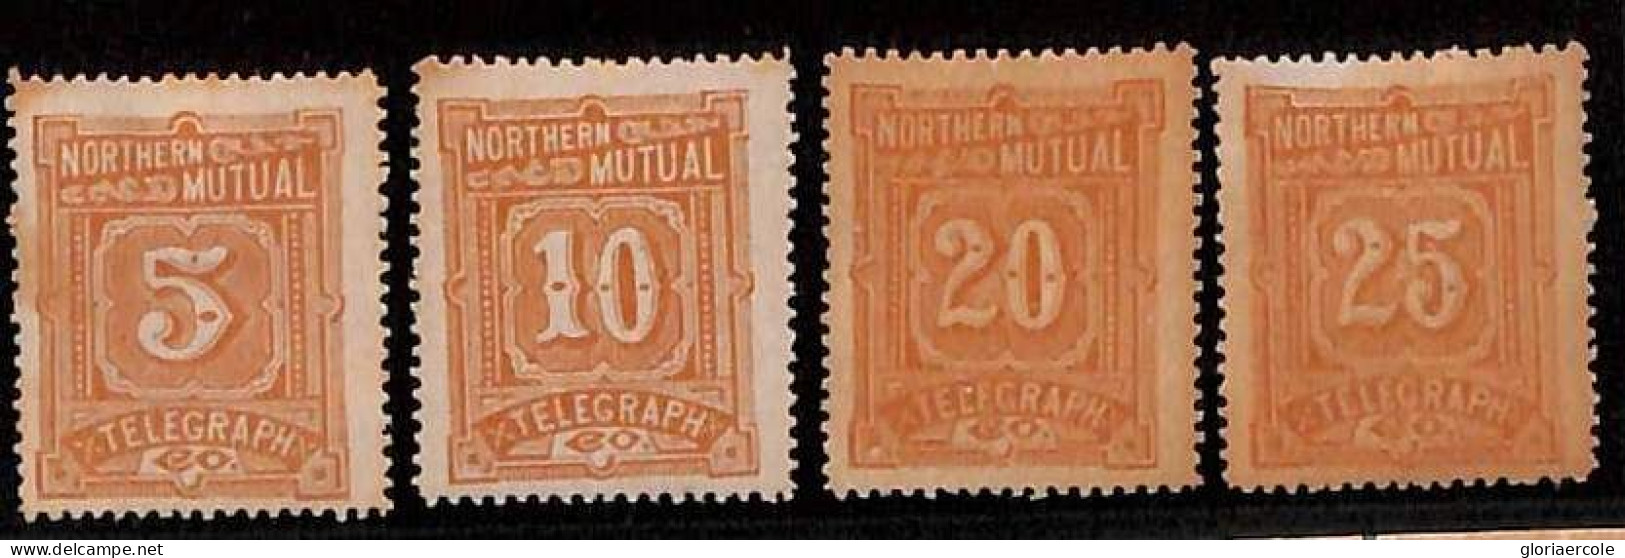 76579 - United States - STAMPS - Scott #  TELEGRAPH  11T 1/4  Mint Hinged M H - Telegraph Stamps